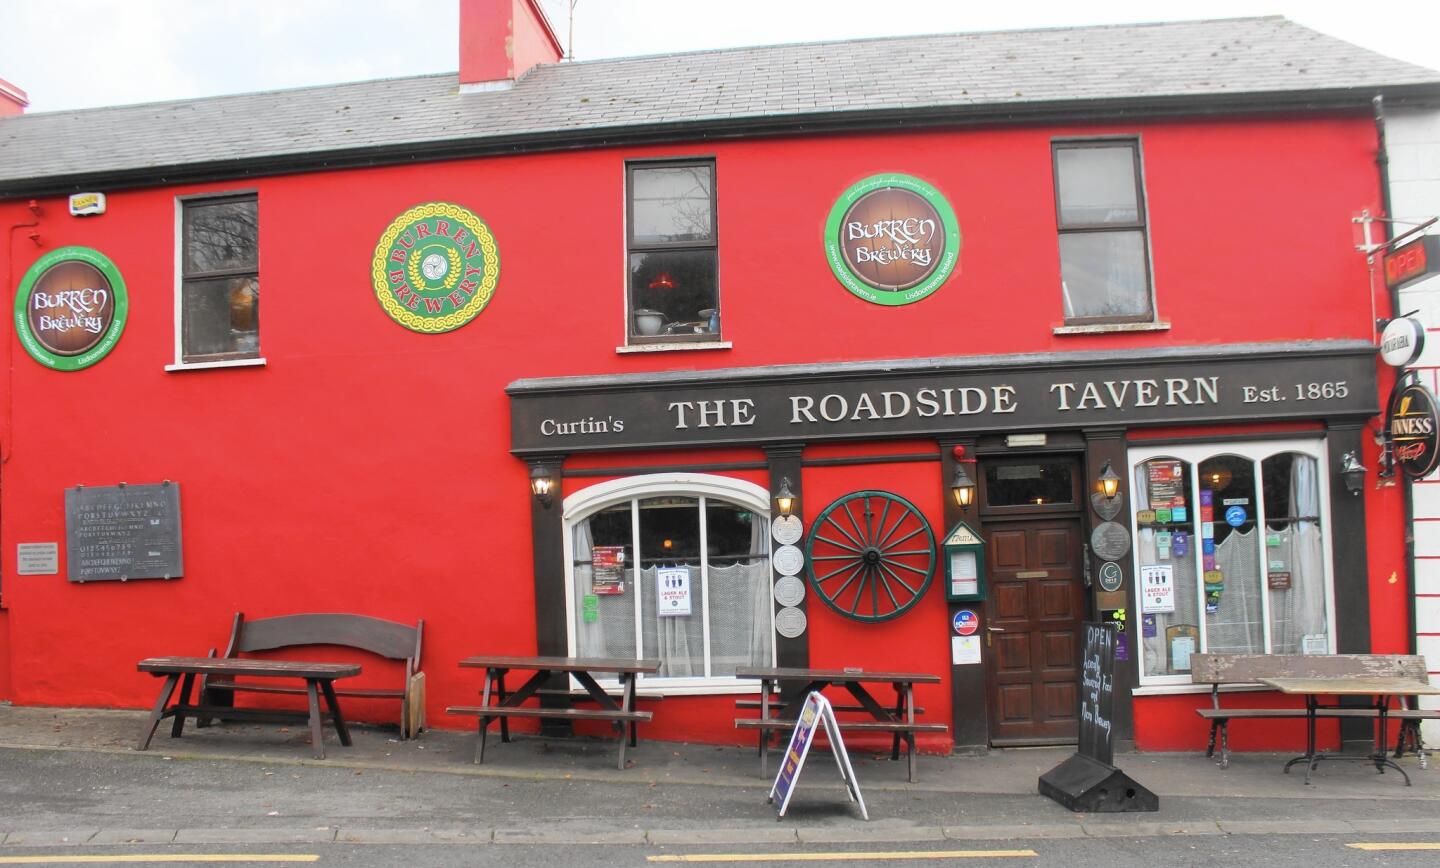 The Burren Brewery is next to The Roadside Tavern, one of the oldest pubs in the Burren area.